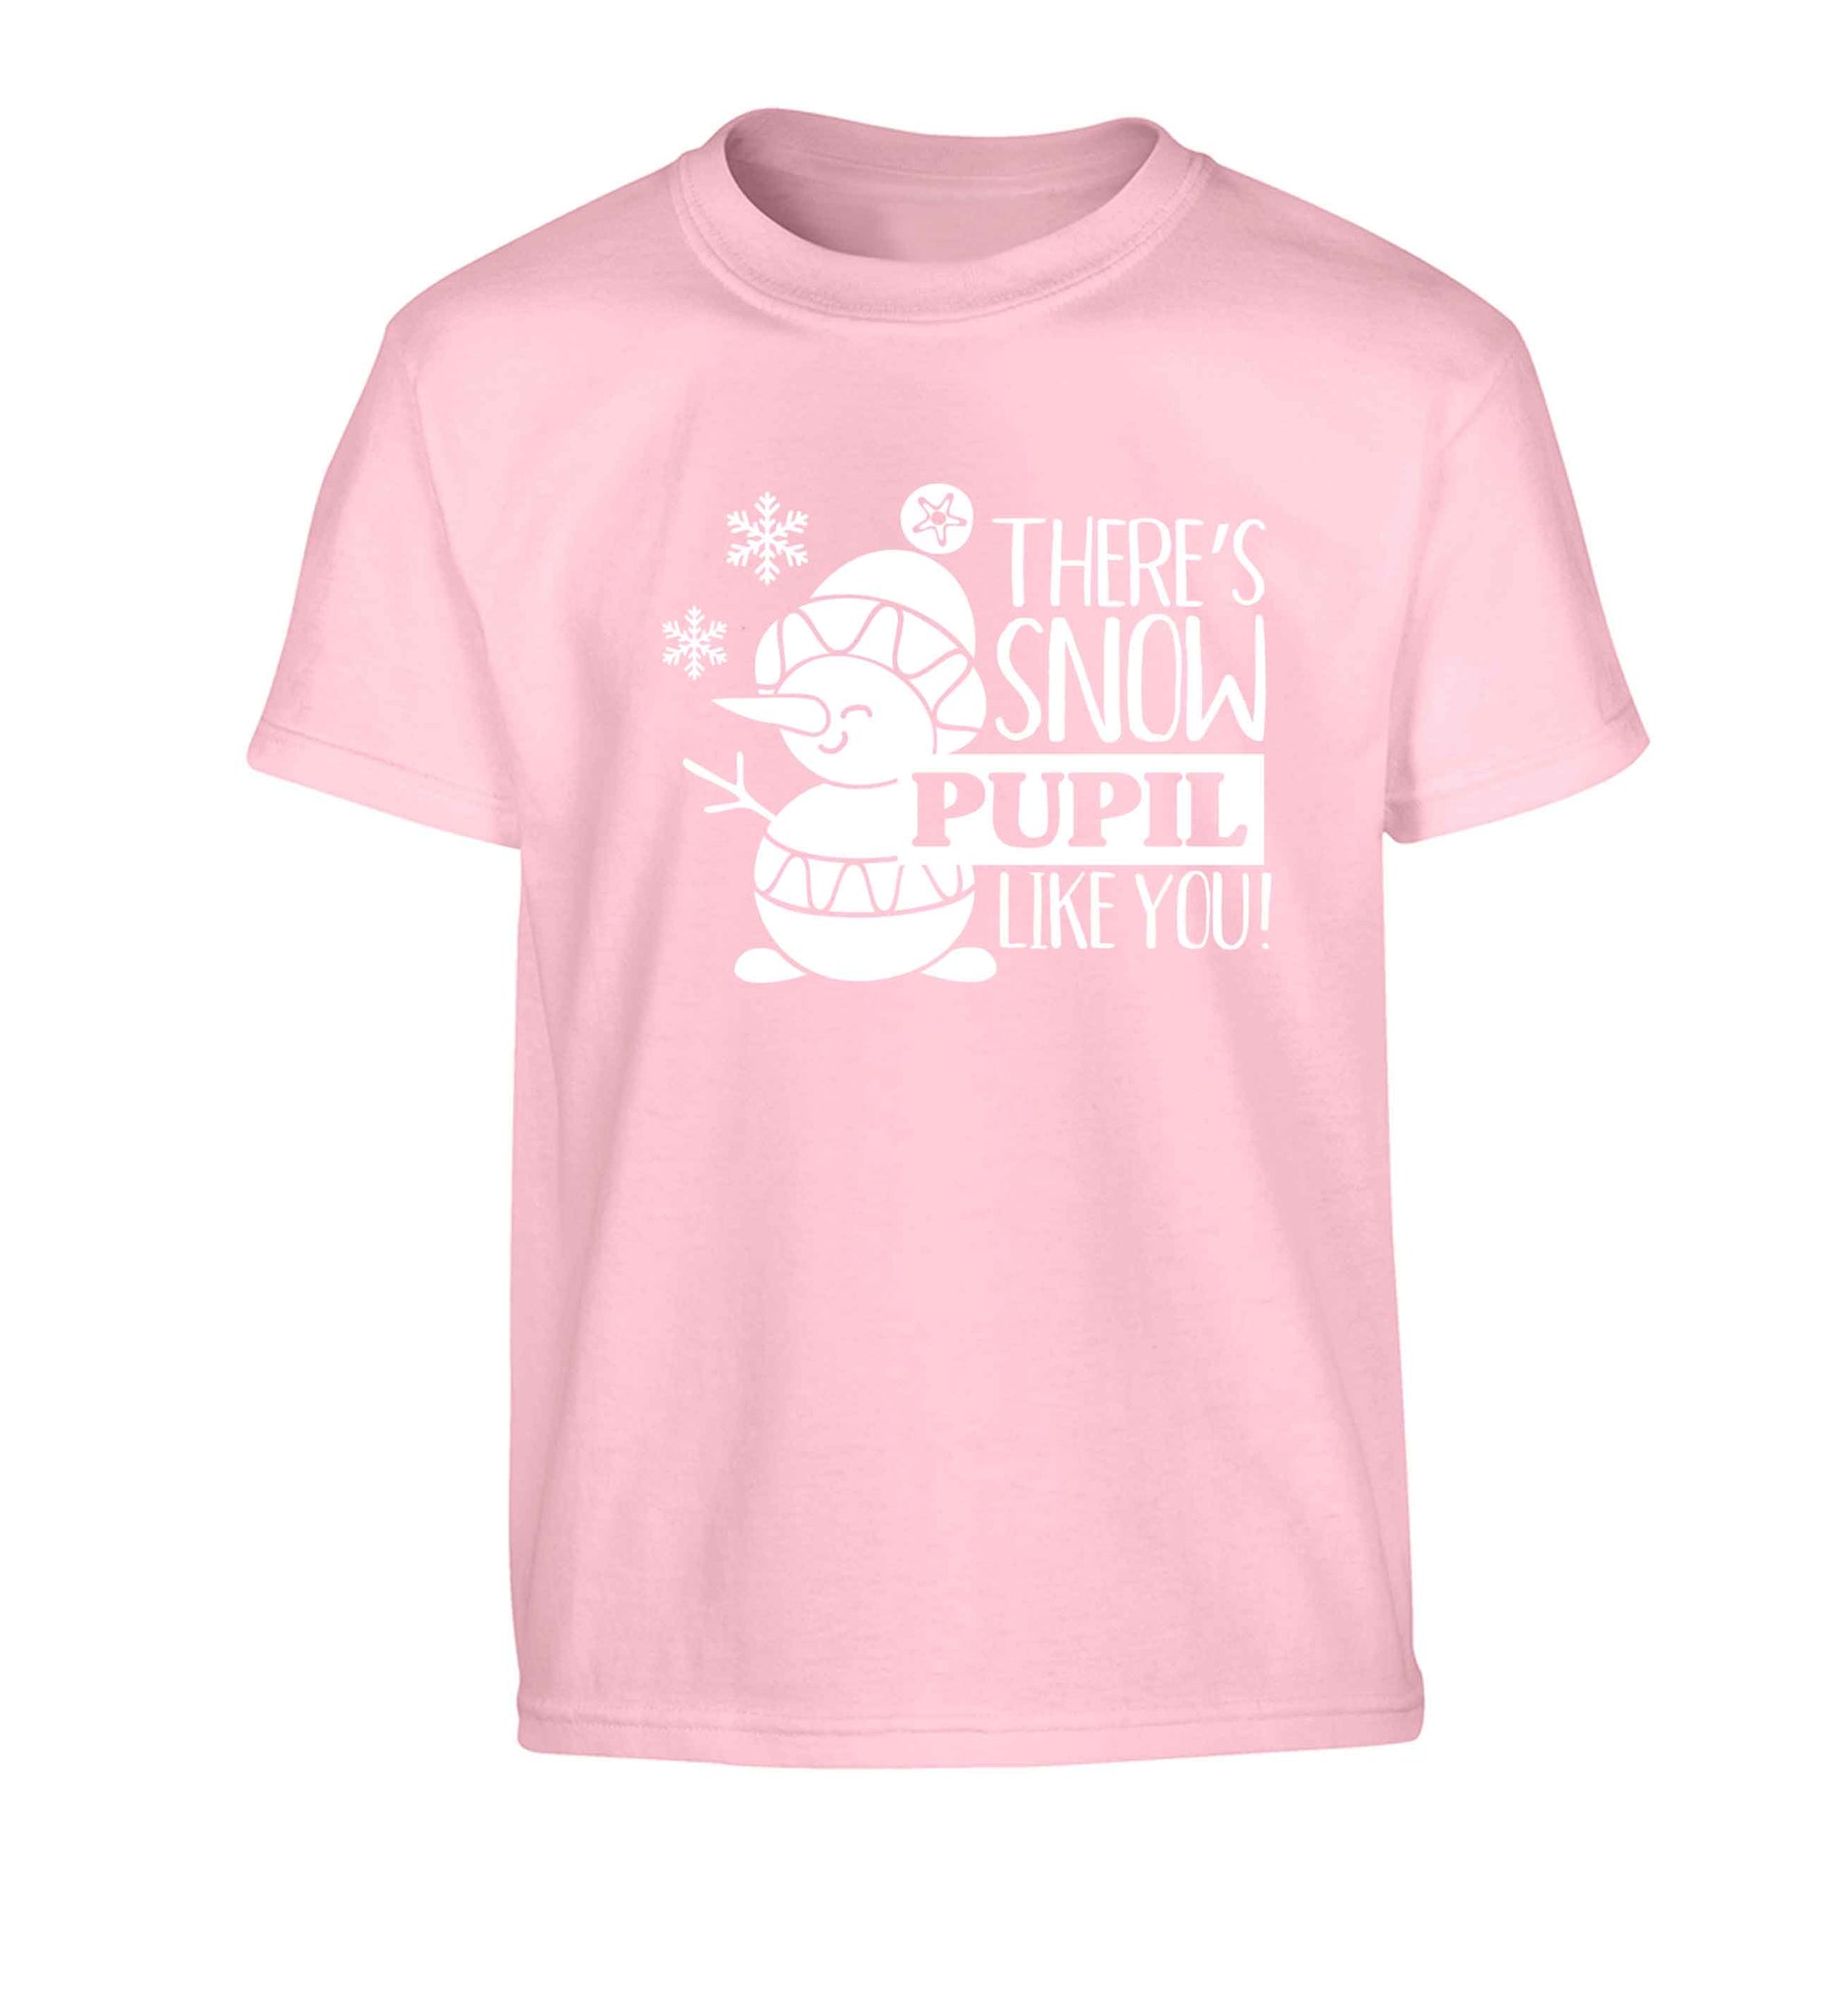 There's snow pupil like you Children's light pink Tshirt 12-13 Years